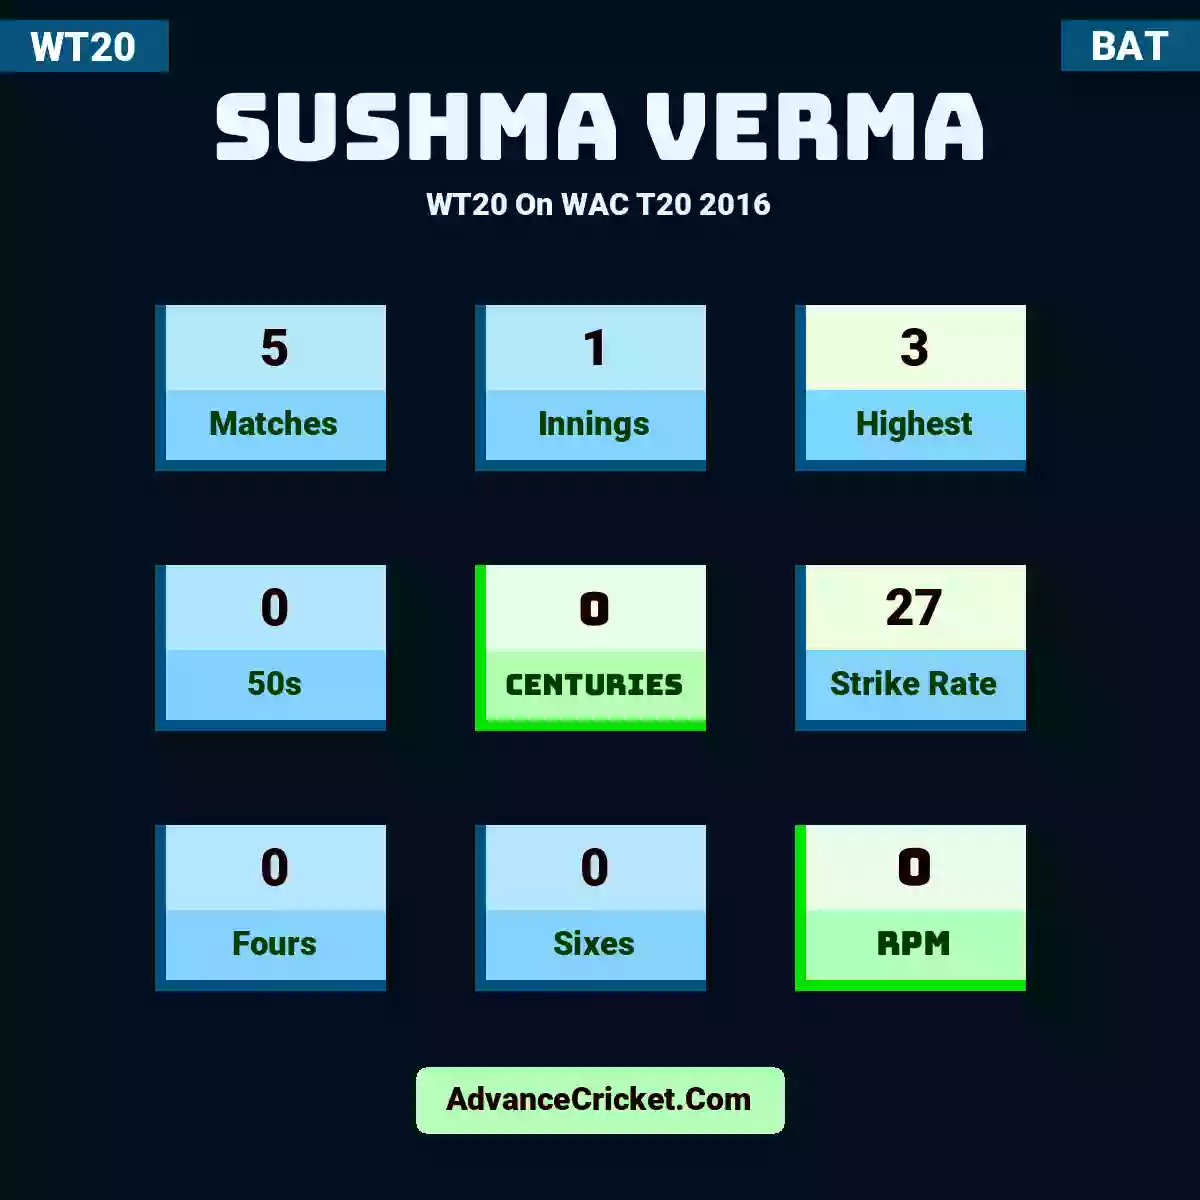 Sushma Verma WT20  On WAC T20 2016, Sushma Verma played 5 matches, scored 3 runs as highest, 0 half-centuries, and 0 centuries, with a strike rate of 27. S.Verma hit 0 fours and 0 sixes, with an RPM of 0.